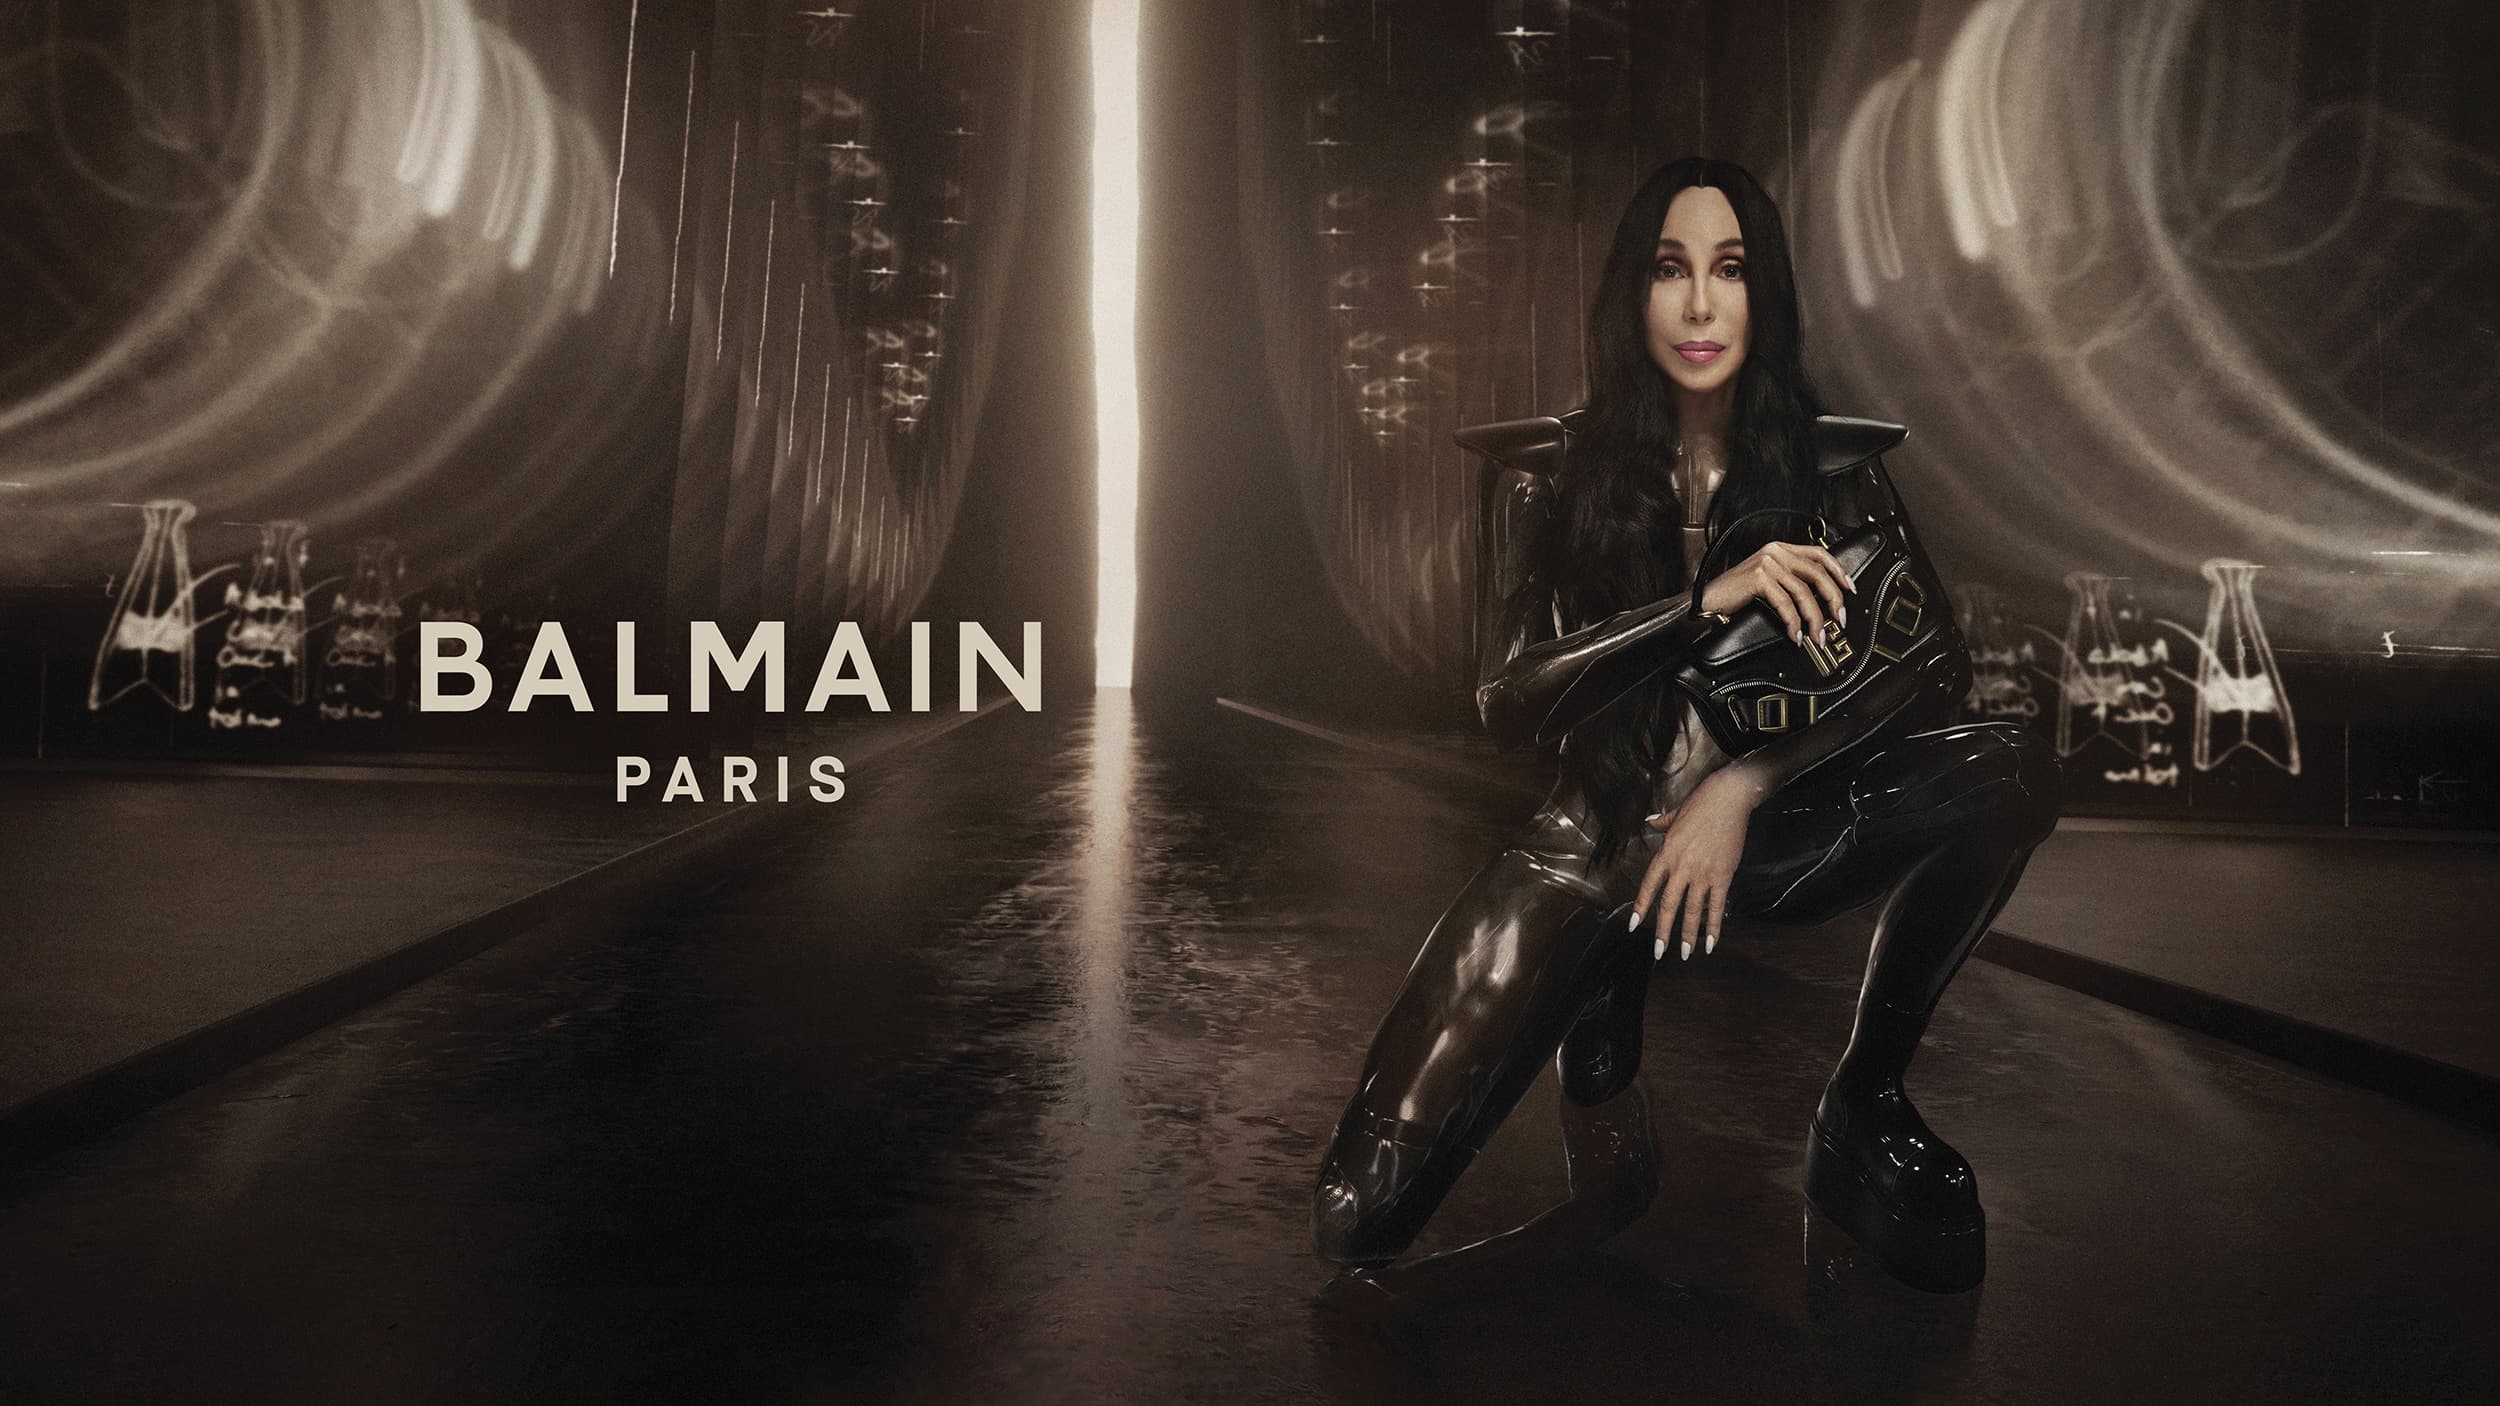 Cher and Balmain partner to introduce The Blaze collection